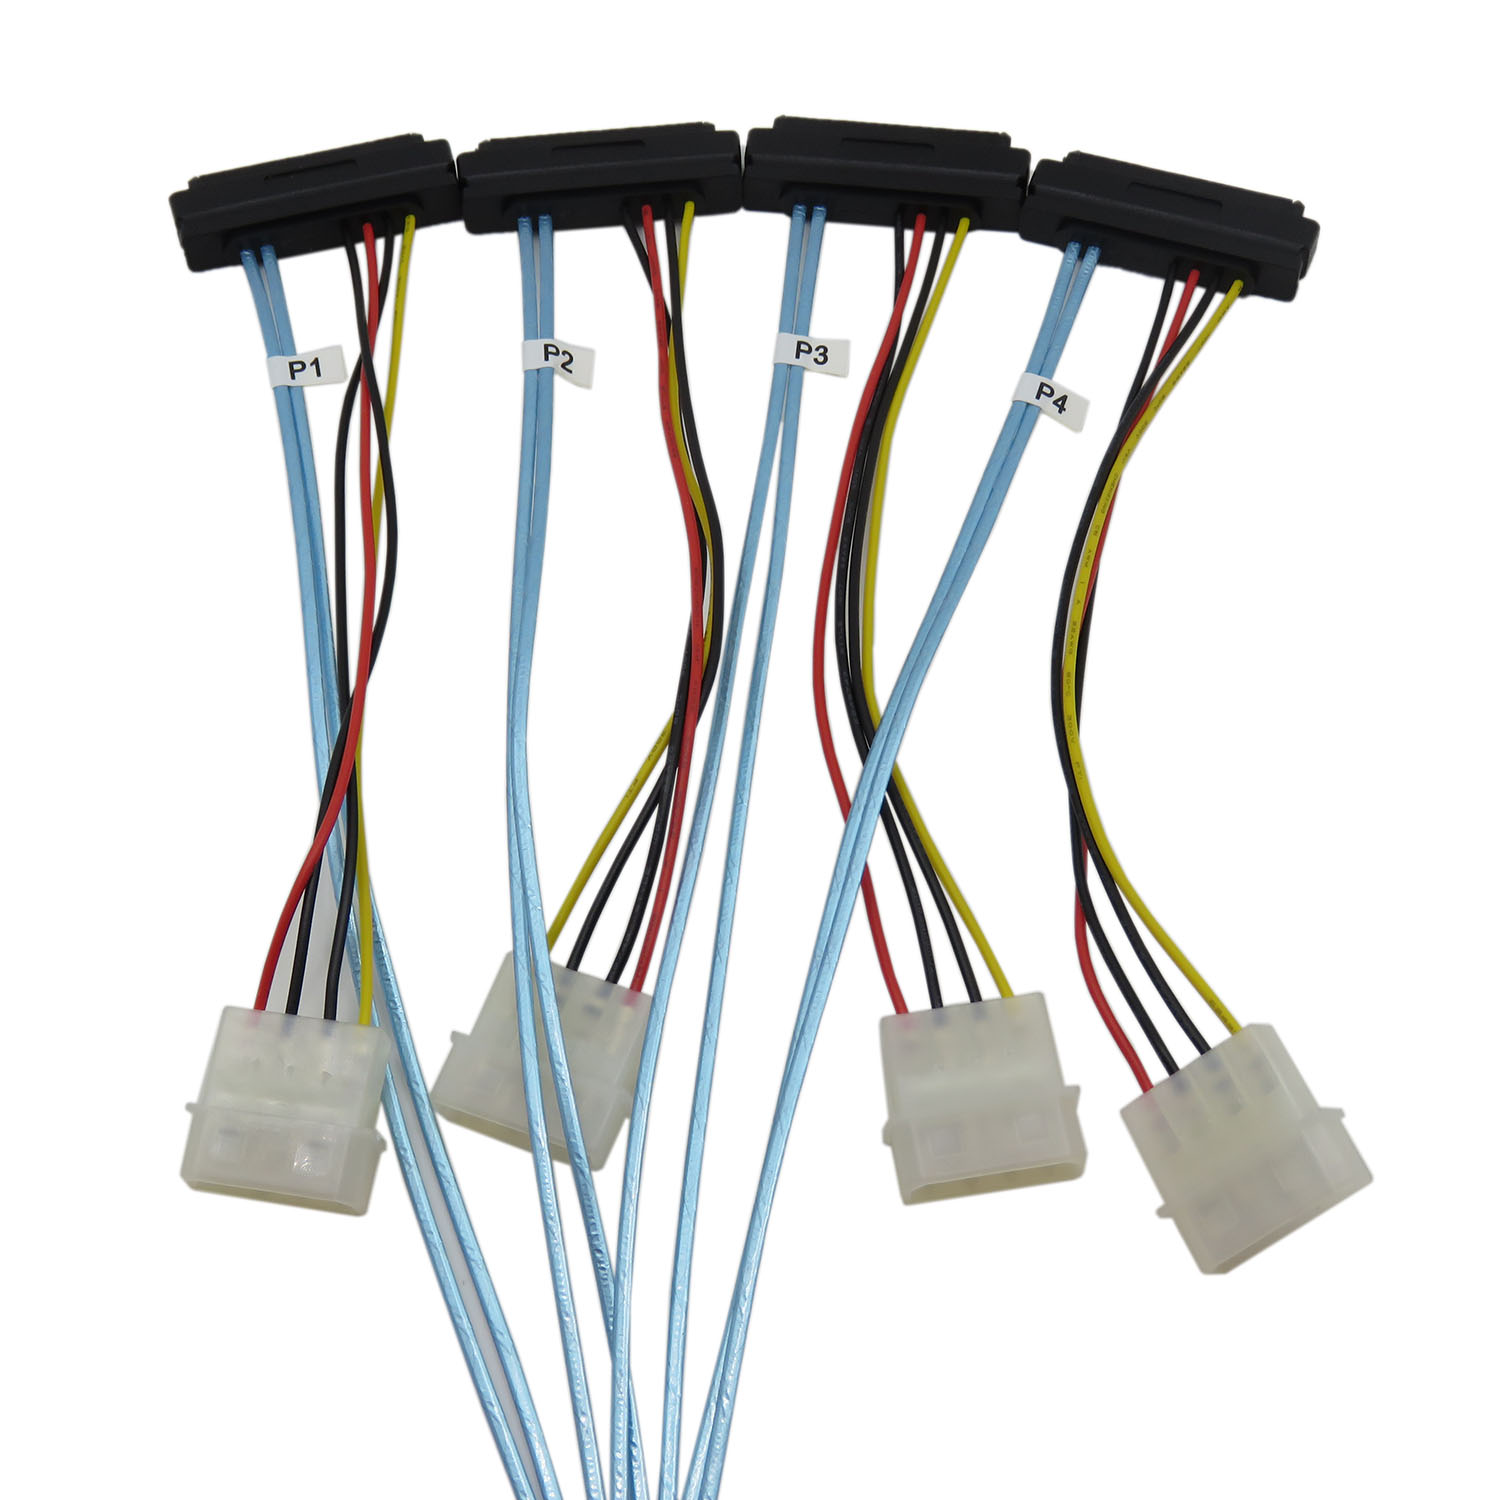 CABLEDECONN Mini SAS 36 SFF-8087 to (4) SFF-8482 Connectors with 4P Power Cable 1M H0407